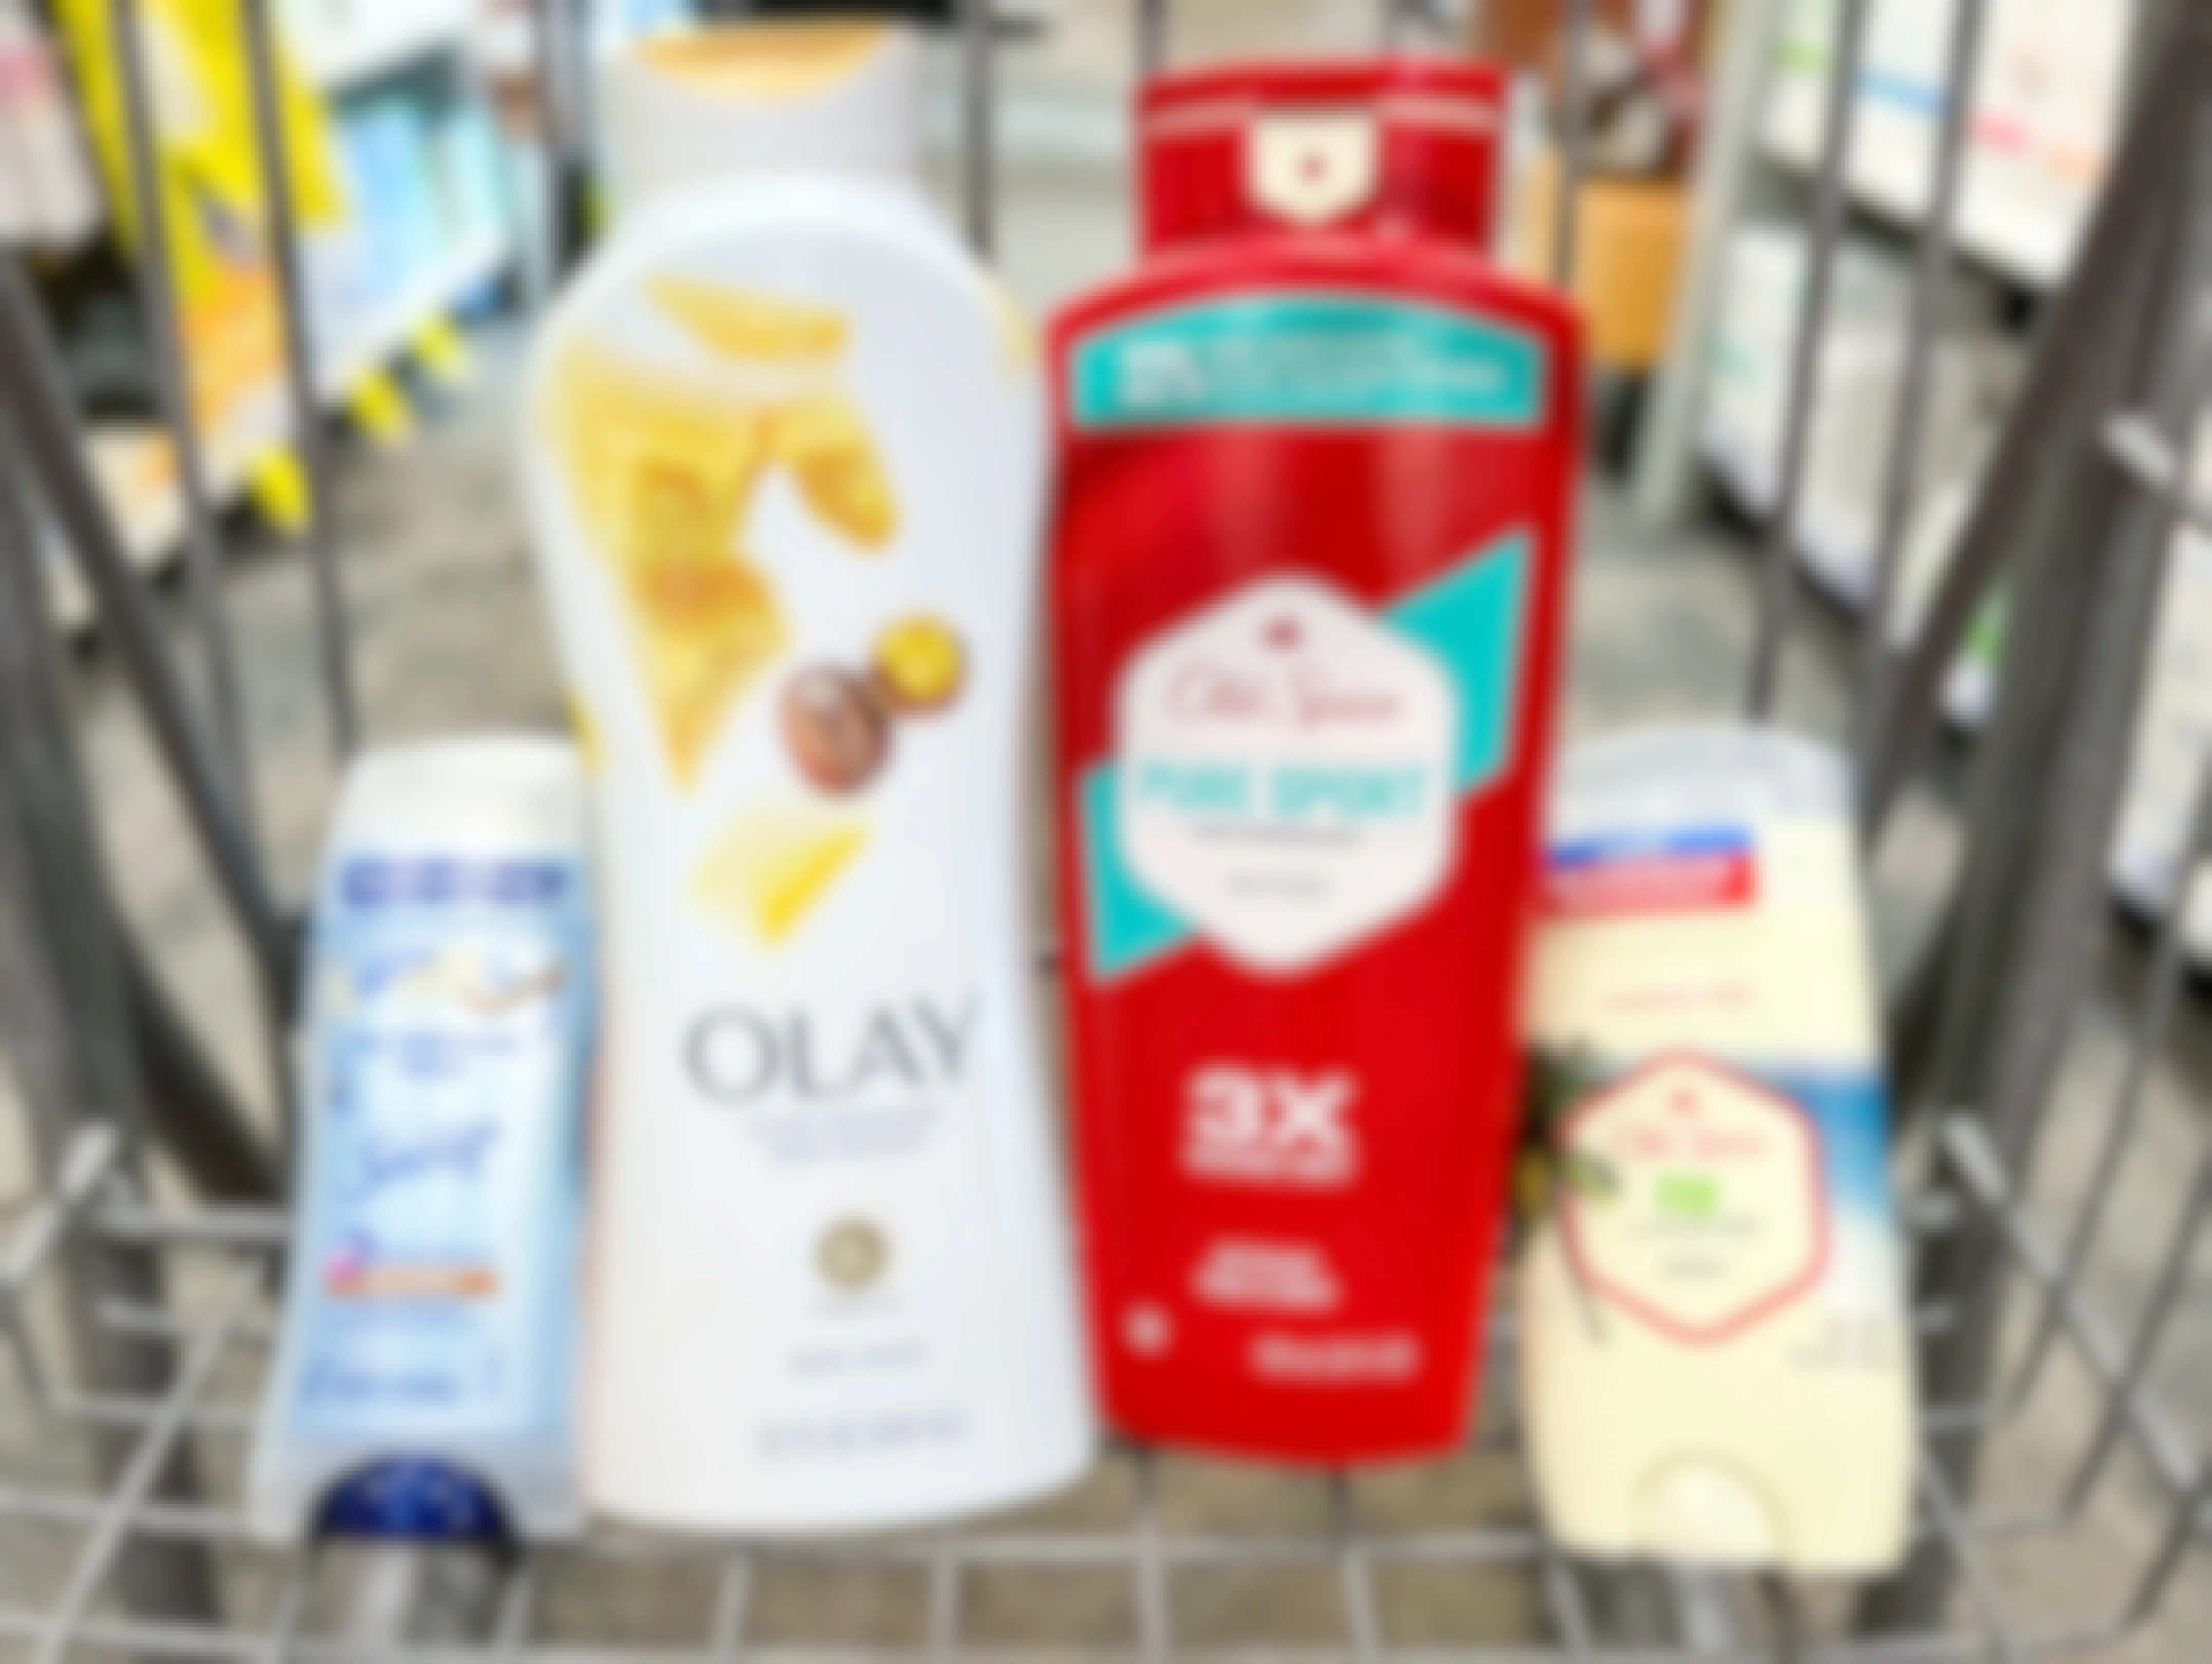 secret deodorant, olay body wash, and old spice in a cvs cart